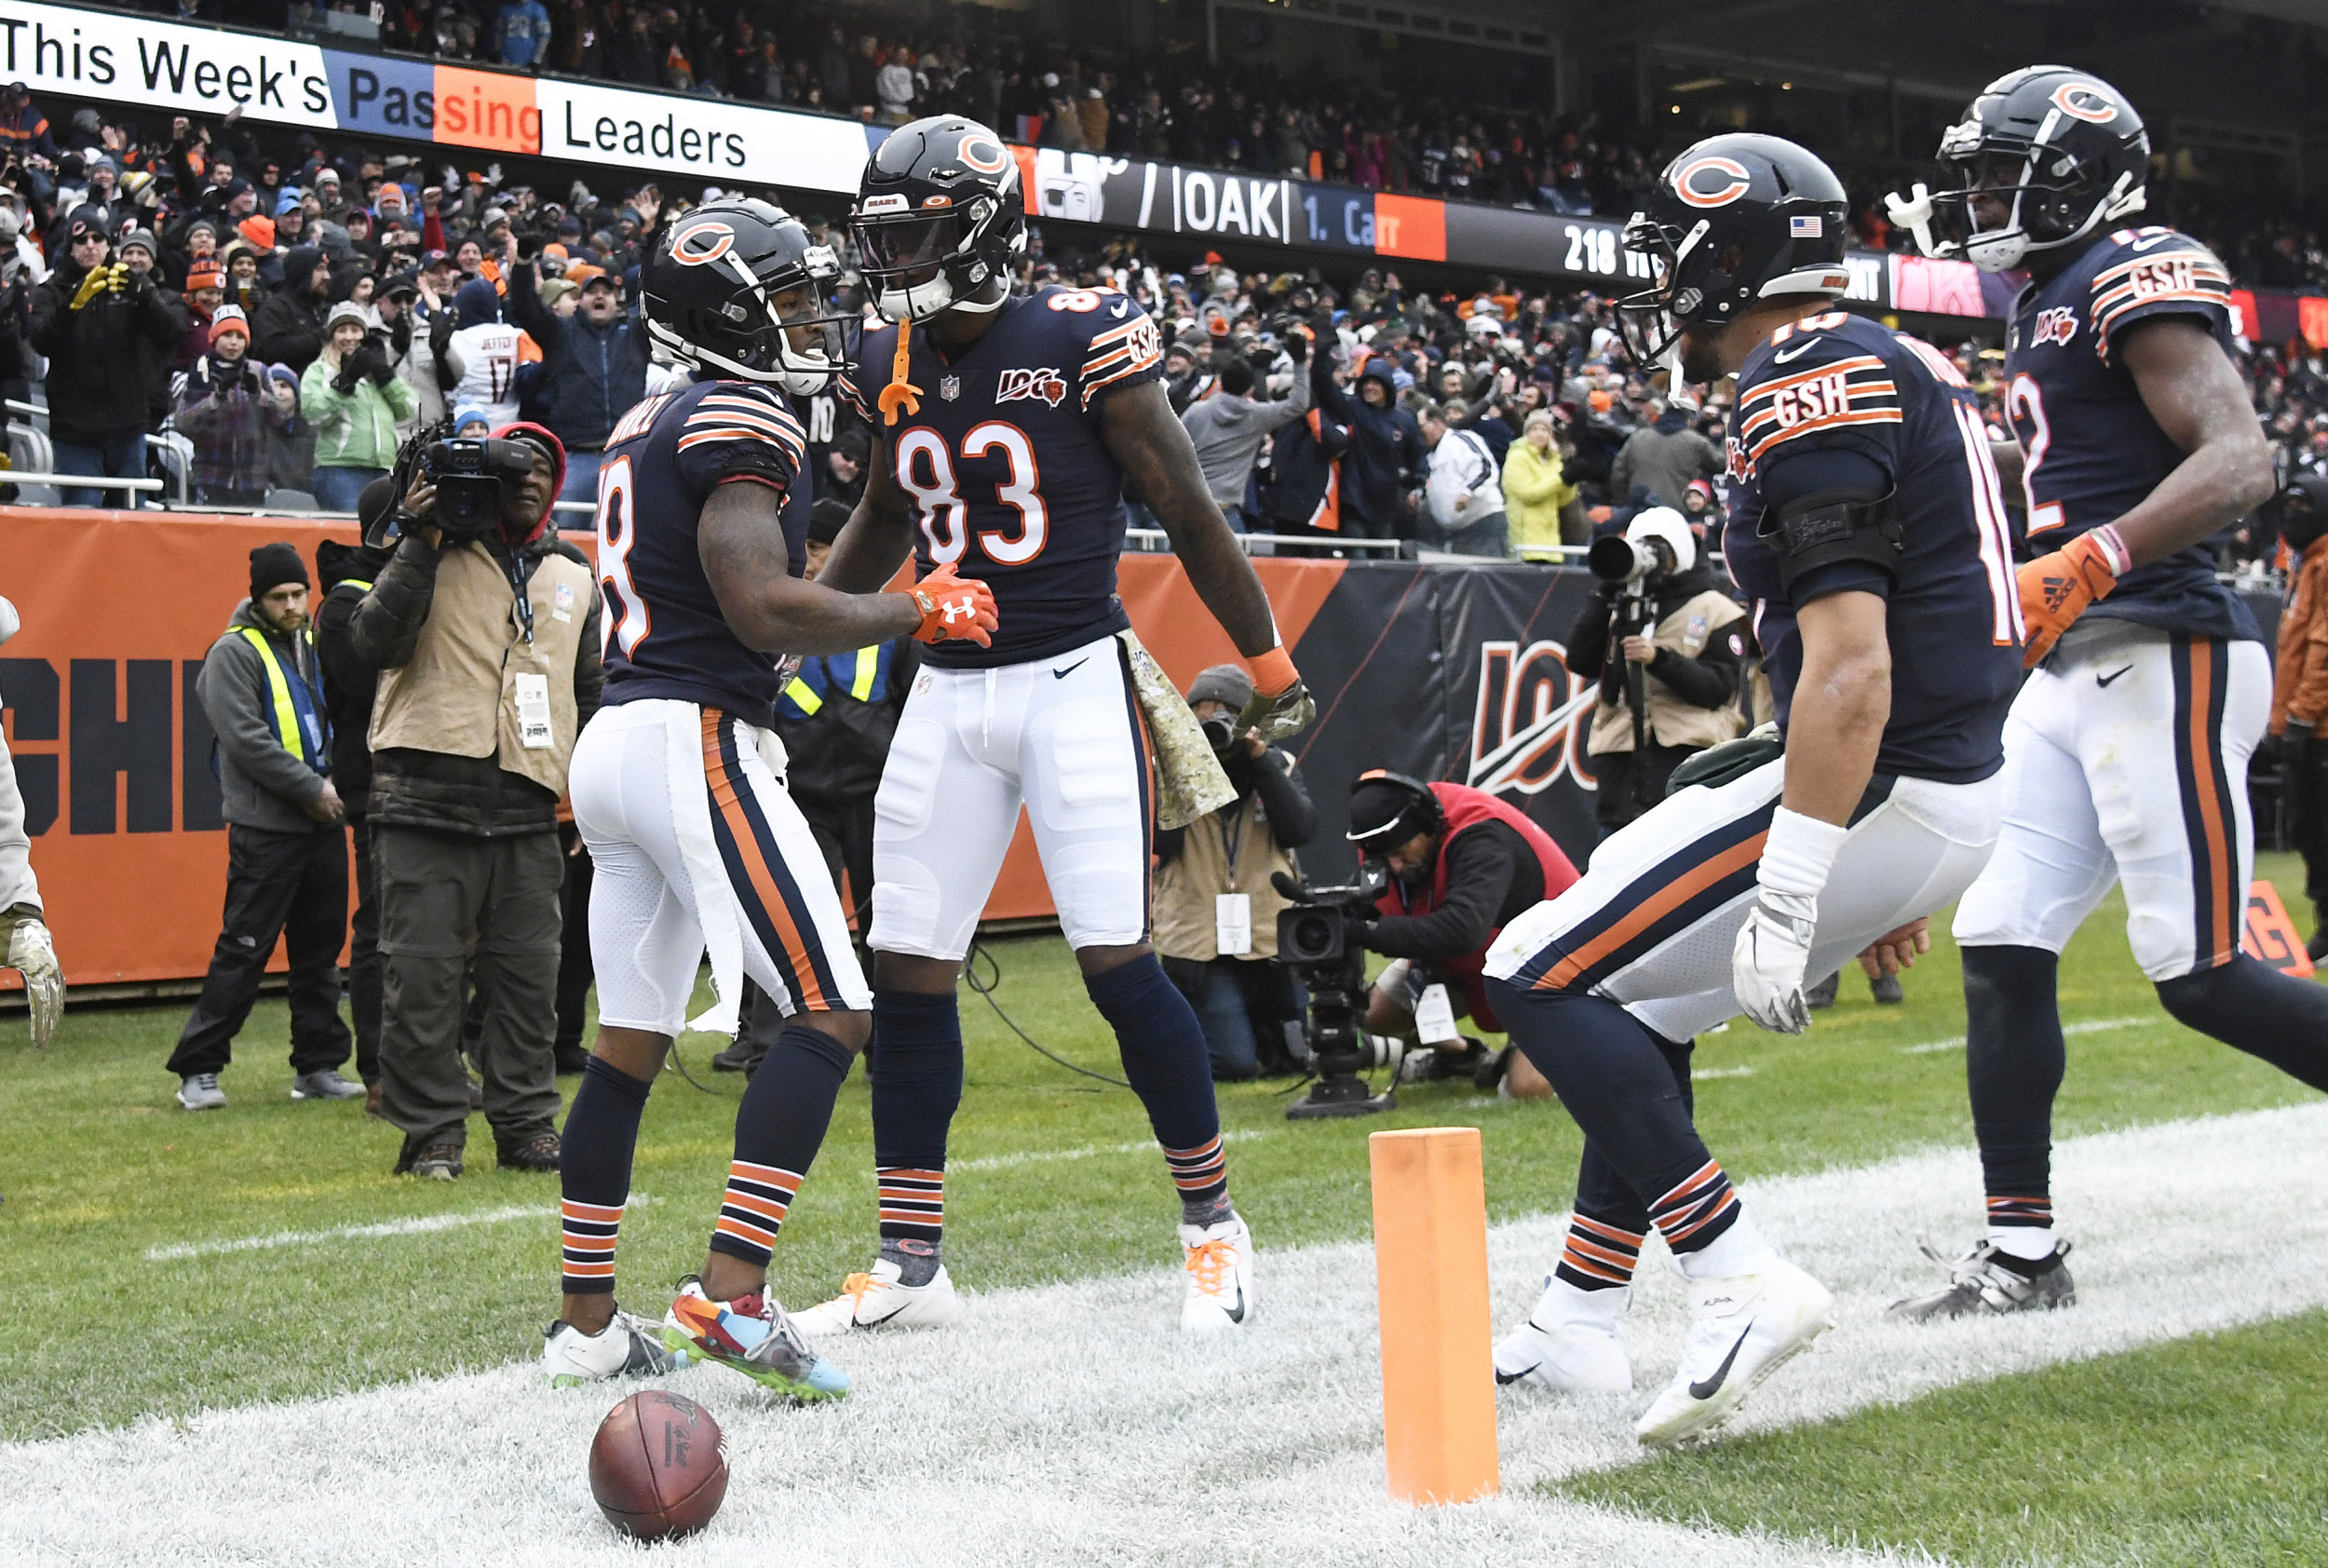 How to watch Lions vs. Bears: NFL live stream info, TV channel